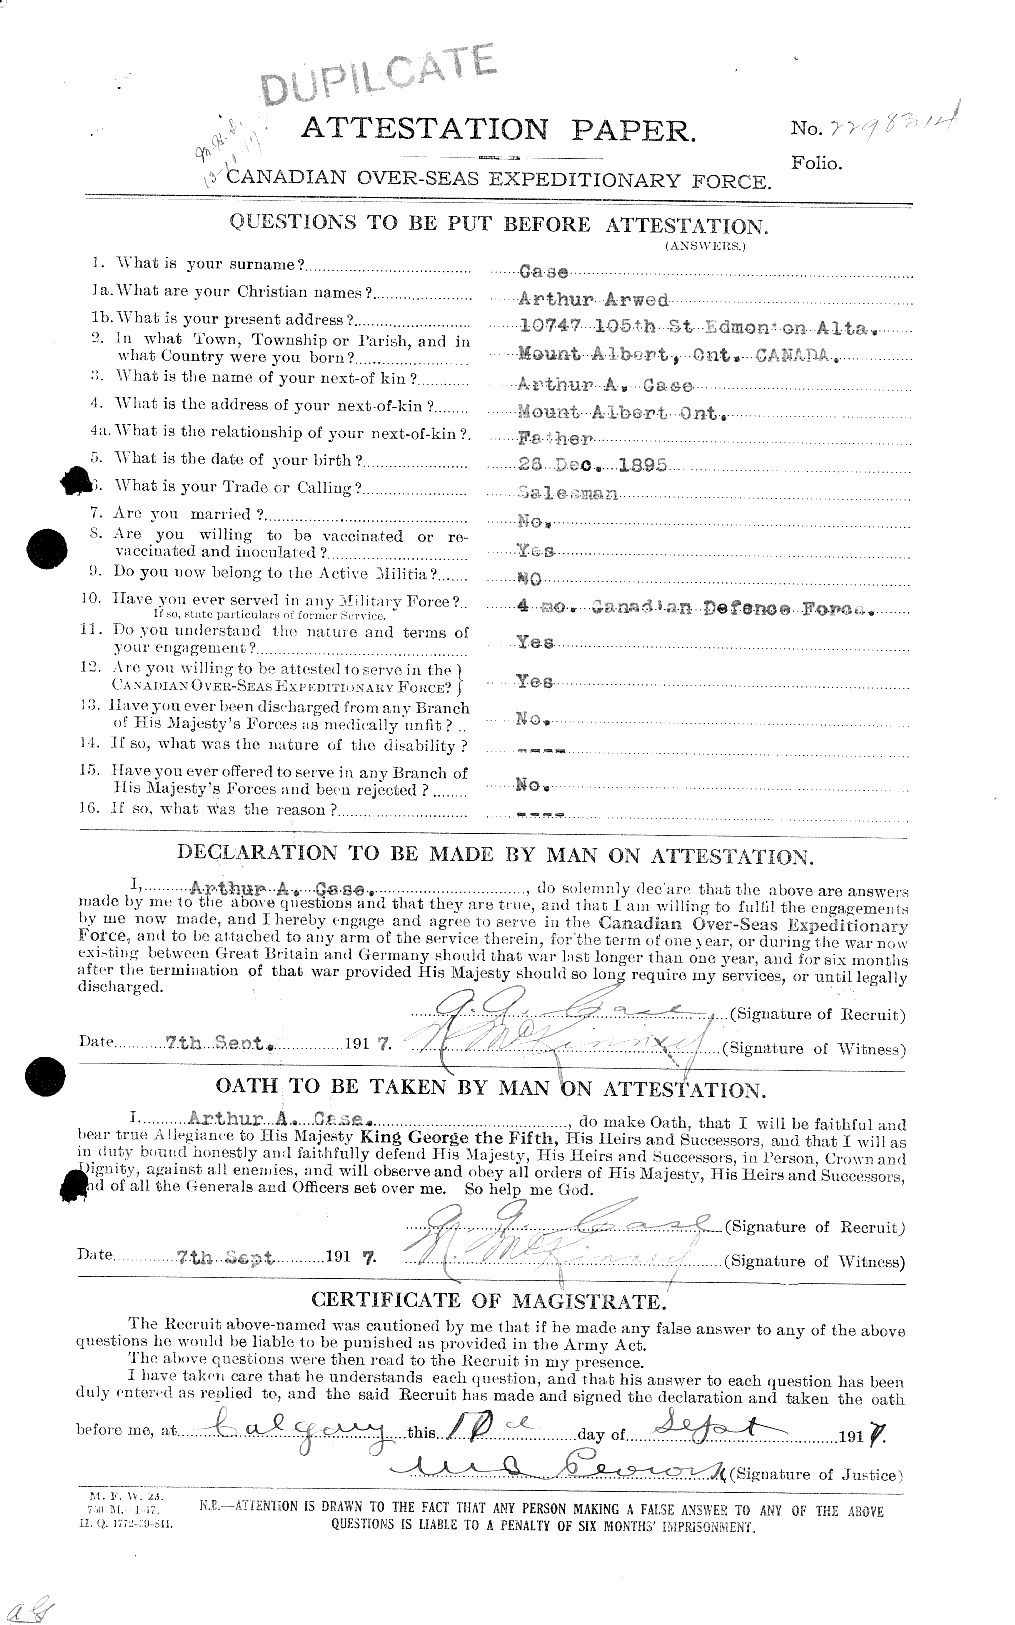 Personnel Records of the First World War - CEF 011715a